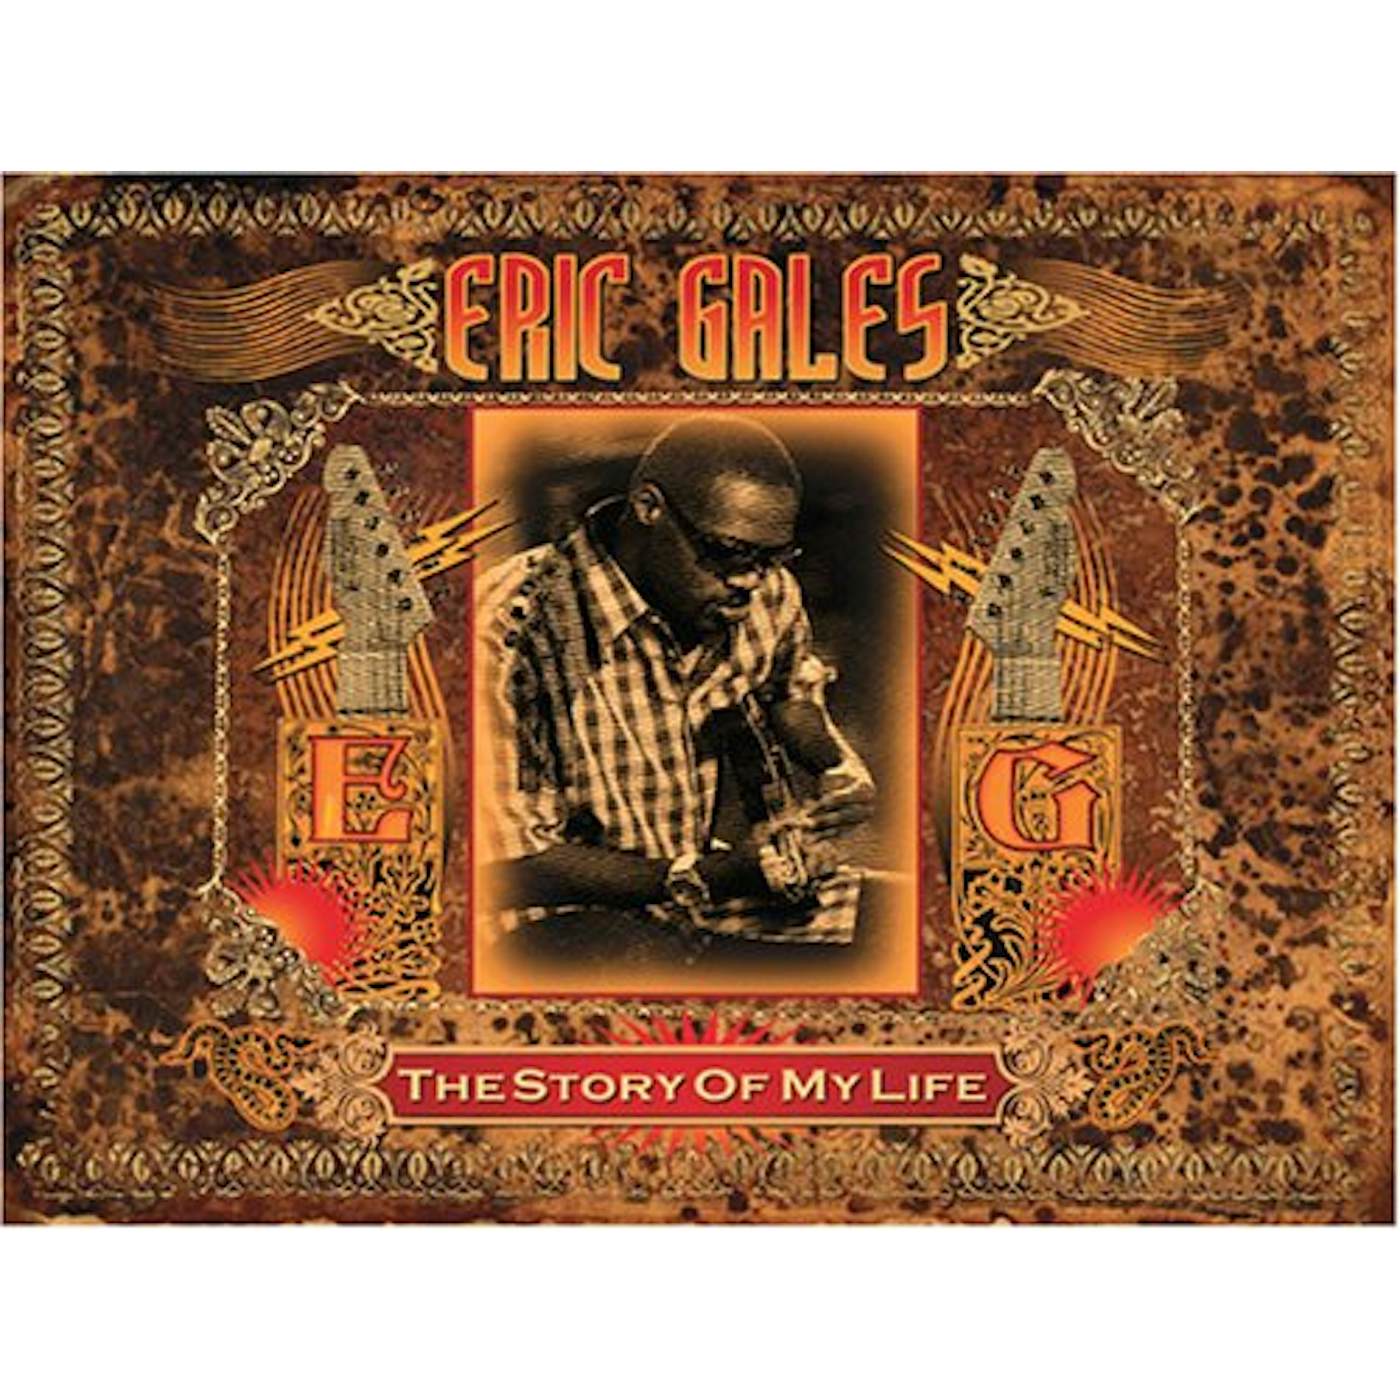 Eric Gales STORY OF MY LIFE CD